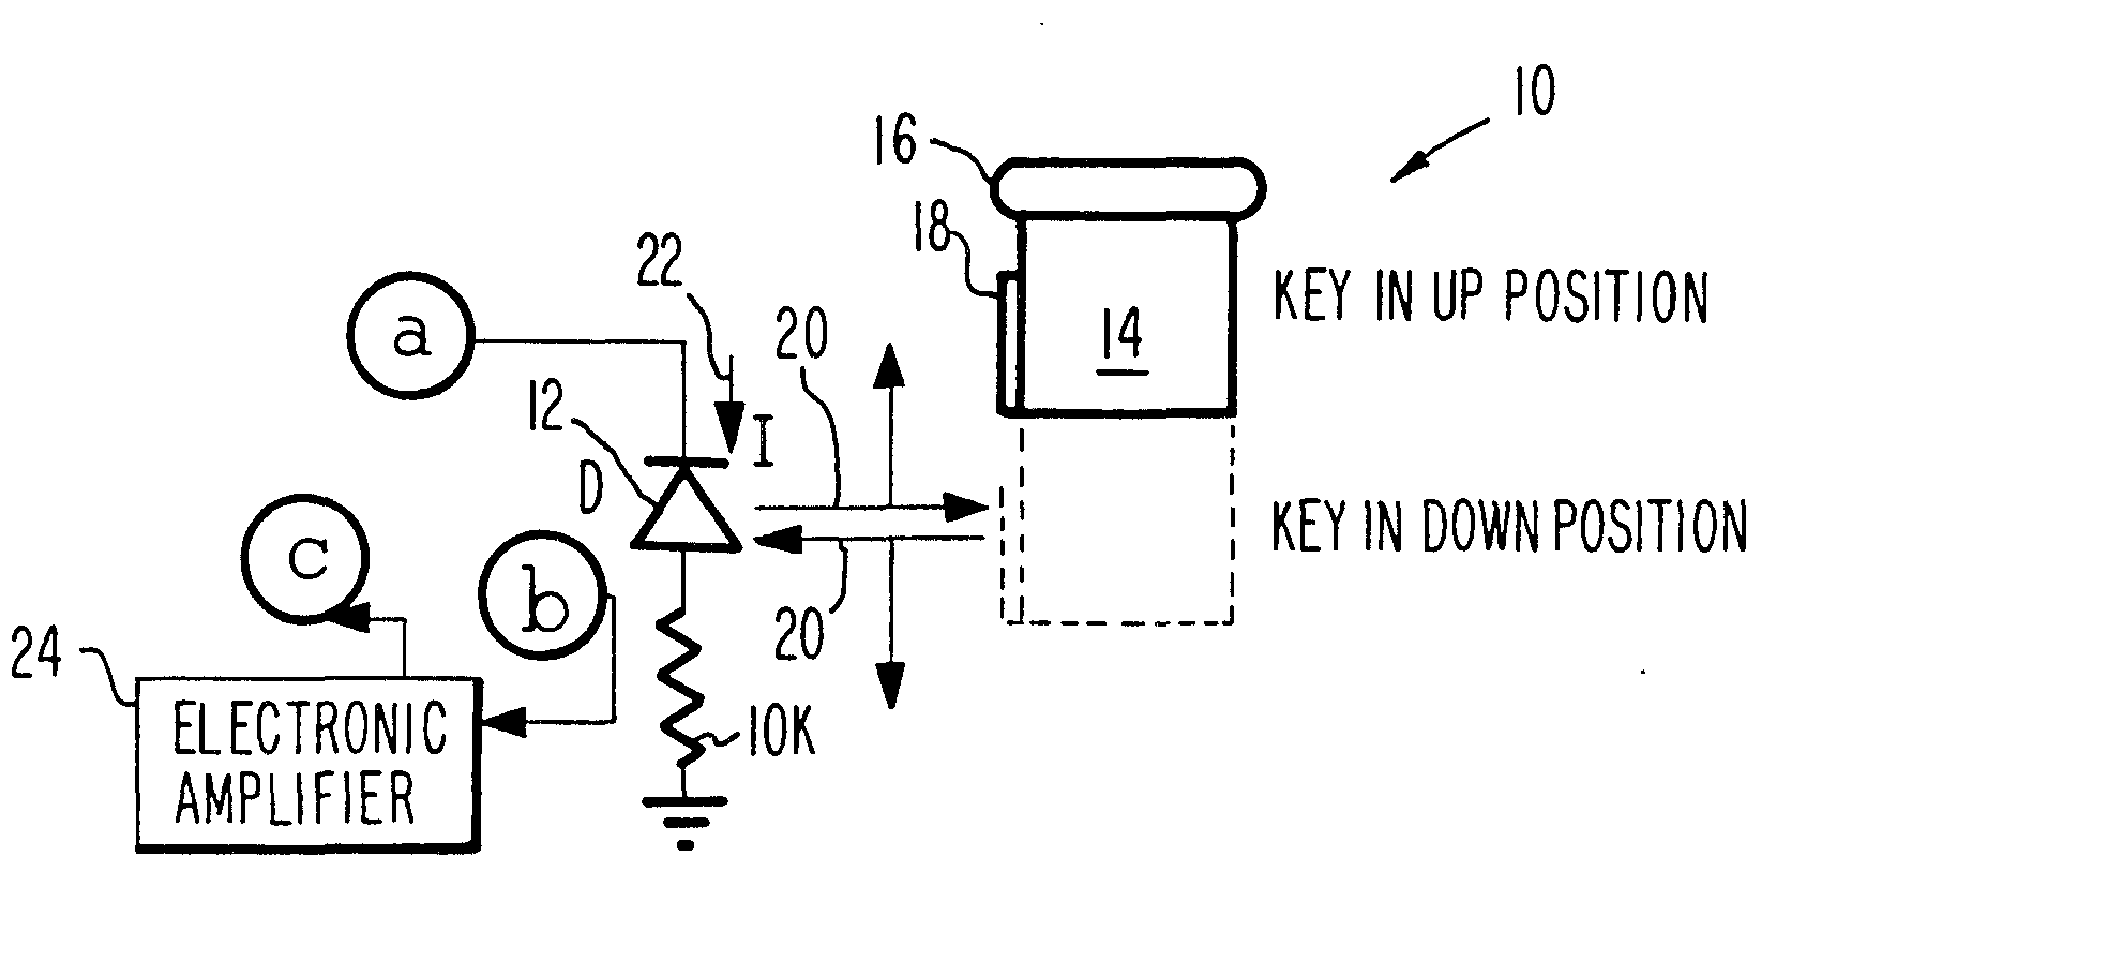 Optical Switch Patent.png